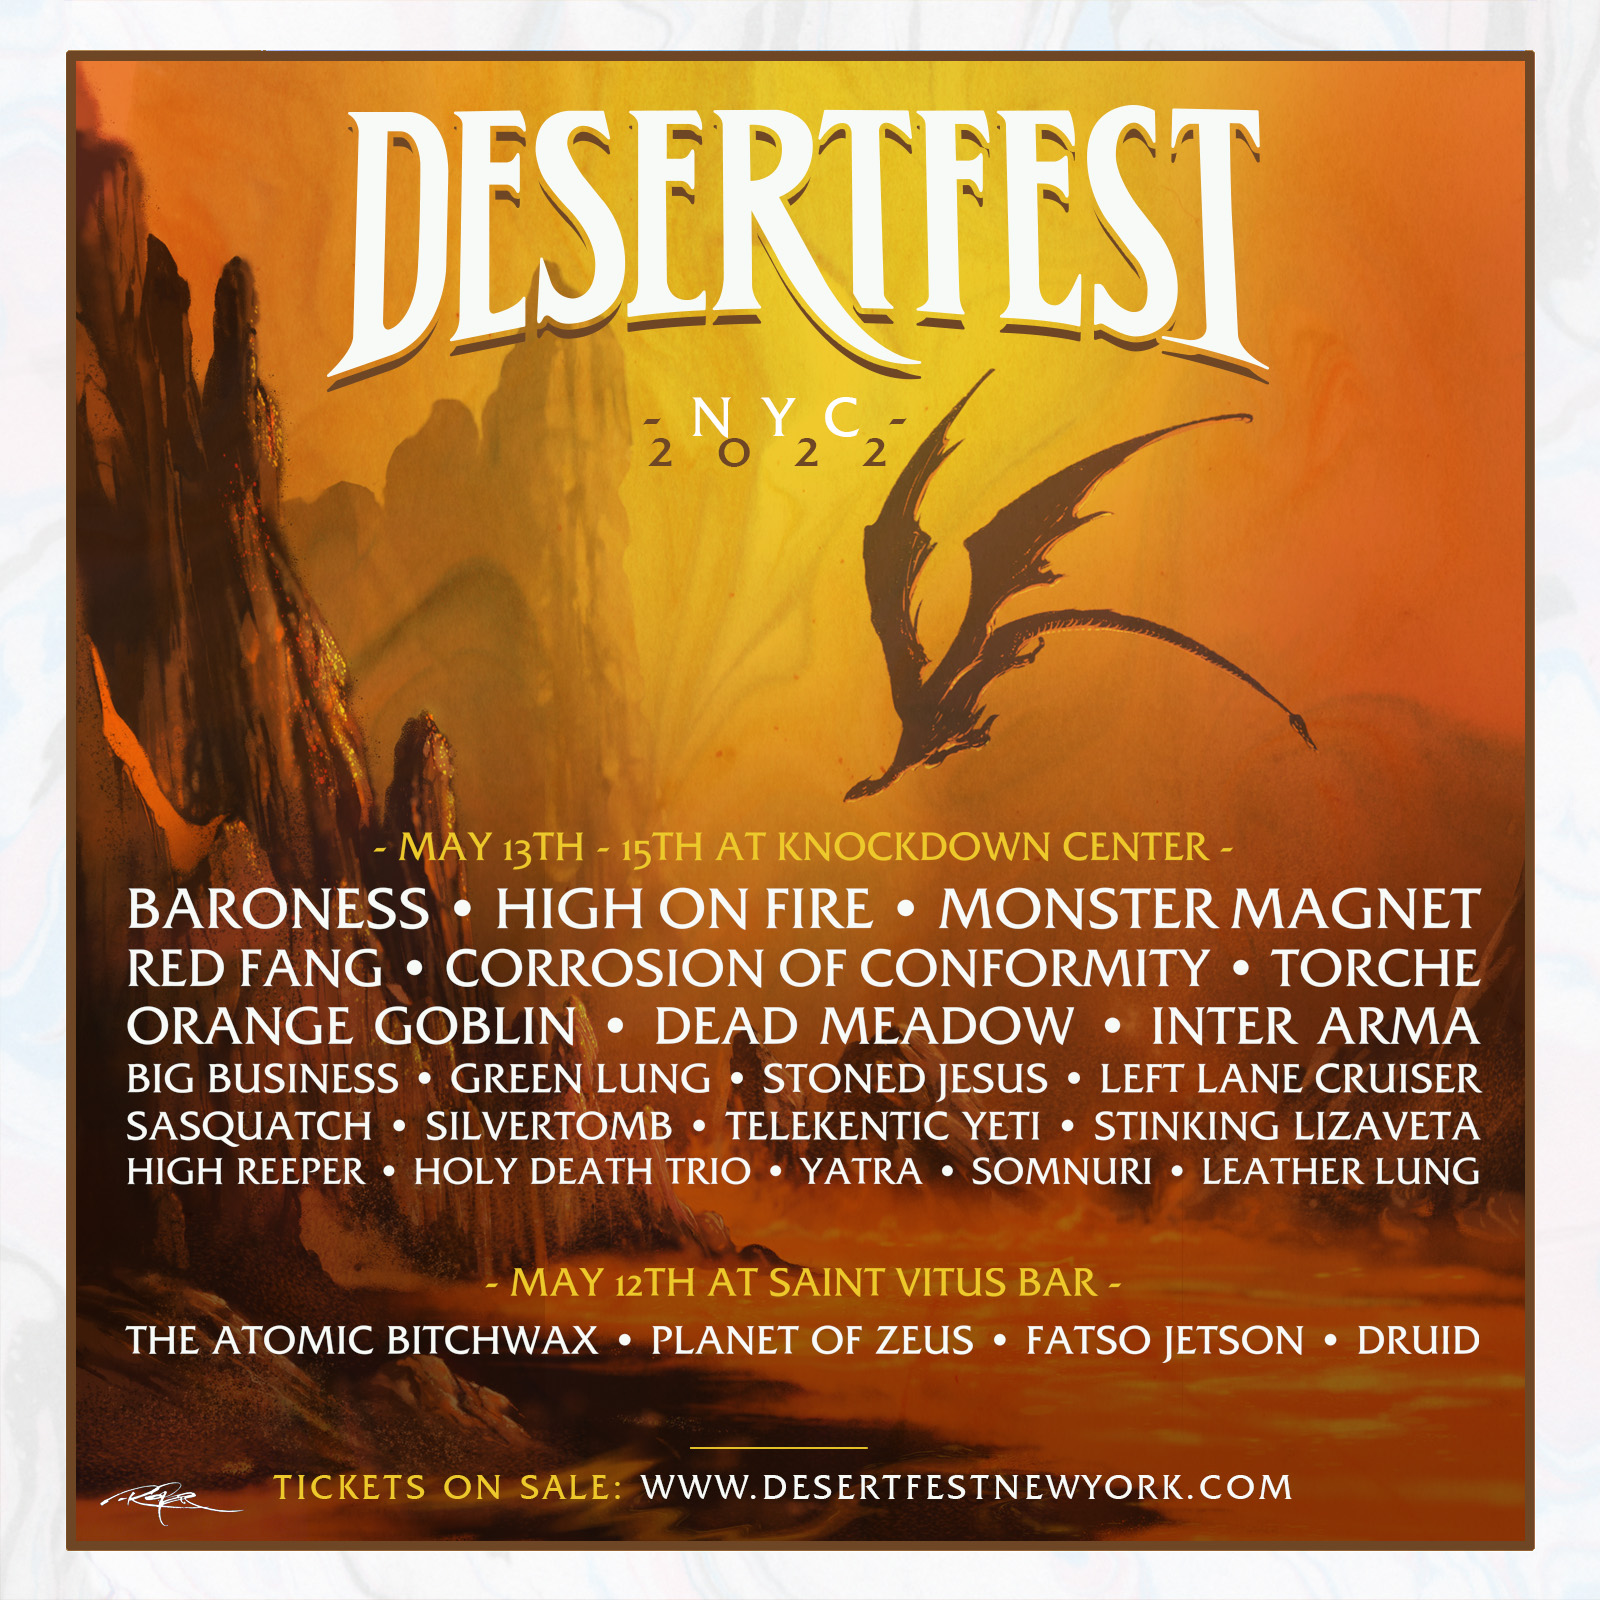 Desertfest NYC 2022 Announces Lineup; Tickets on Sale Today